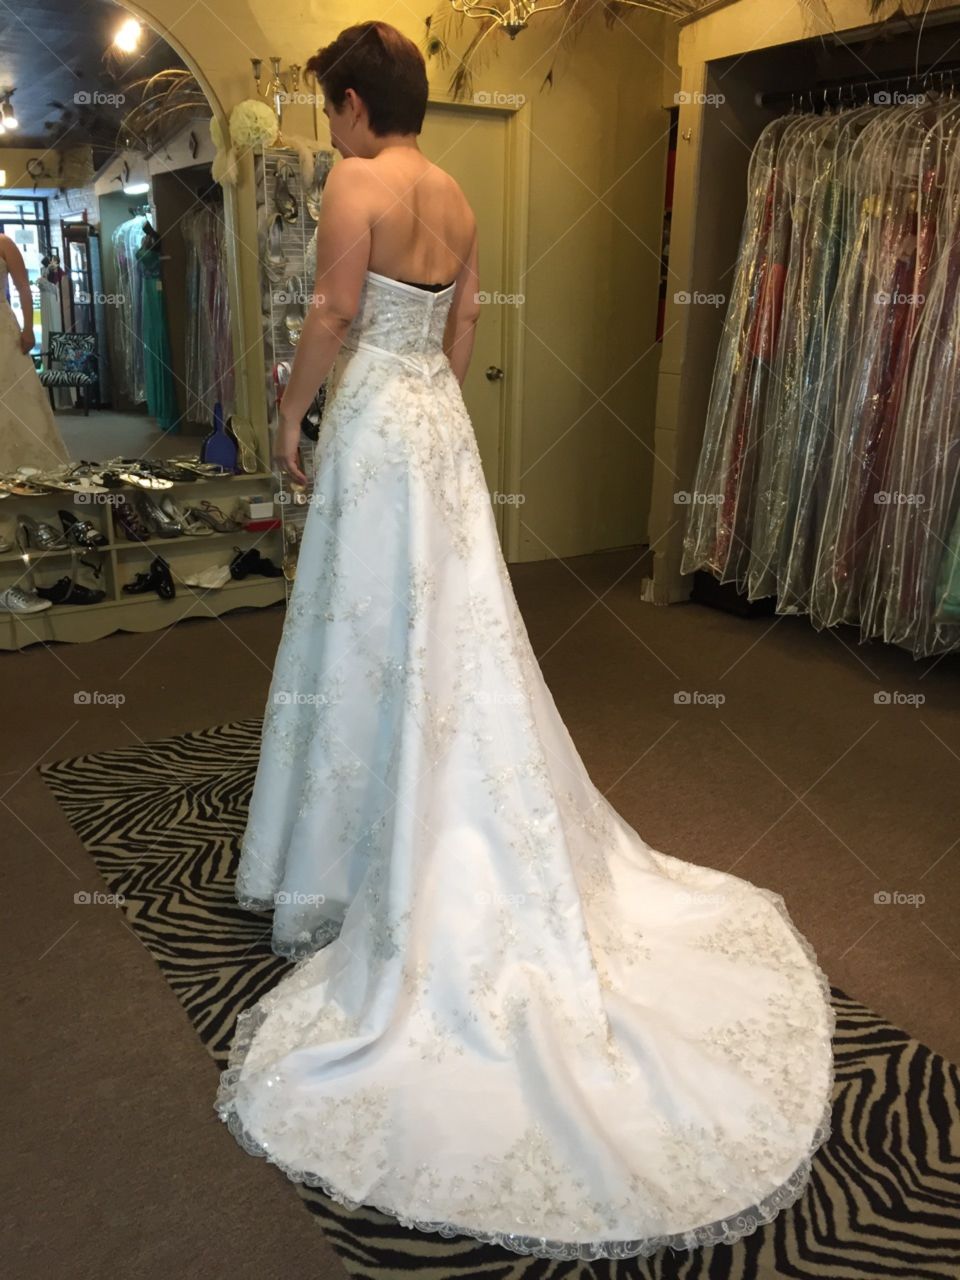 Trying on dresses. Trying on wedding dresses